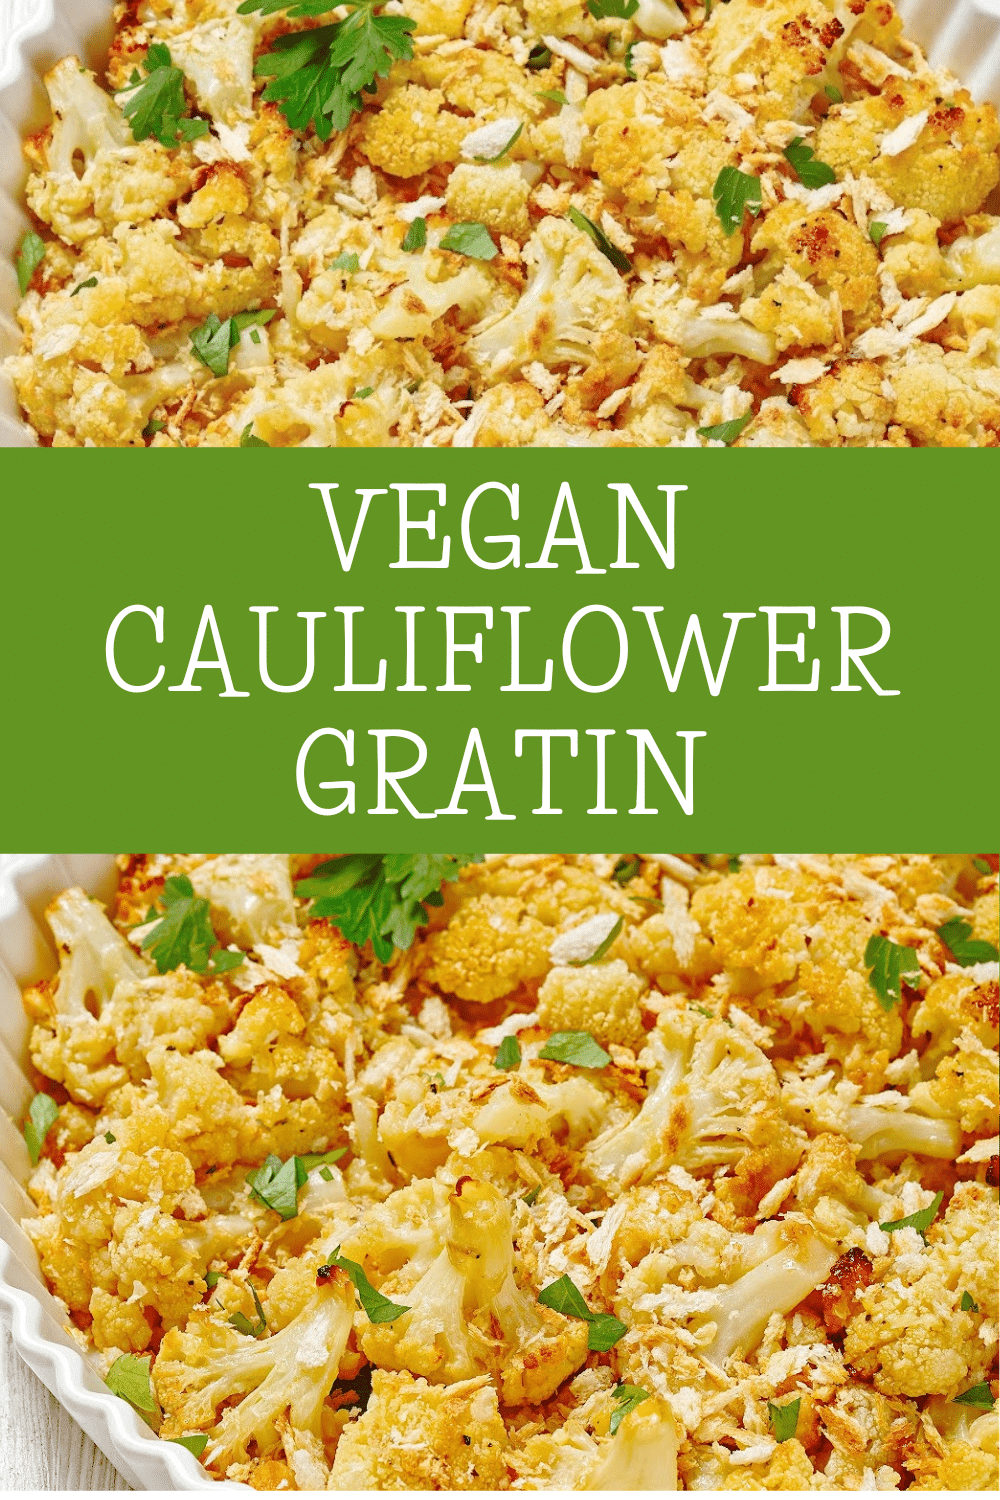 Garlic Cauliflower Gratin ~ Serve with a crisp green salad and crusty bread for dinner or as an easy low-carb addition to your holiday meal! via @thiswifecooks